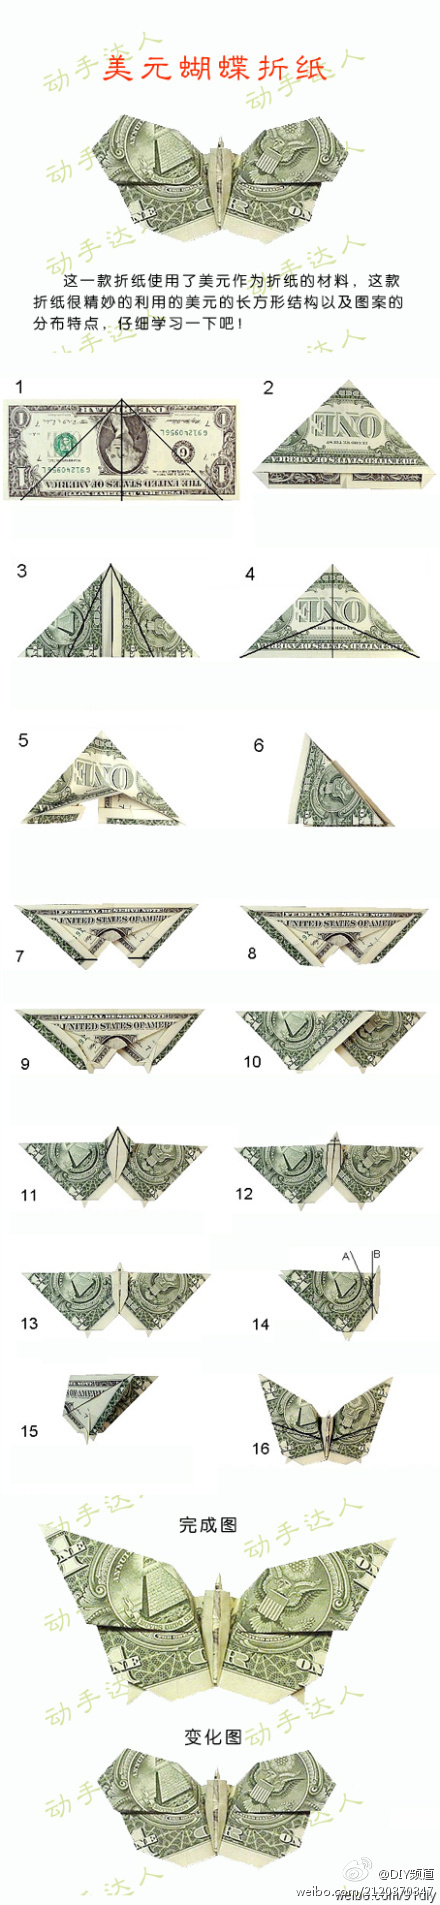 Butterfly Origami Instructions Origami Dollar Bill Butterfly Folding Instructions Origami Instruction